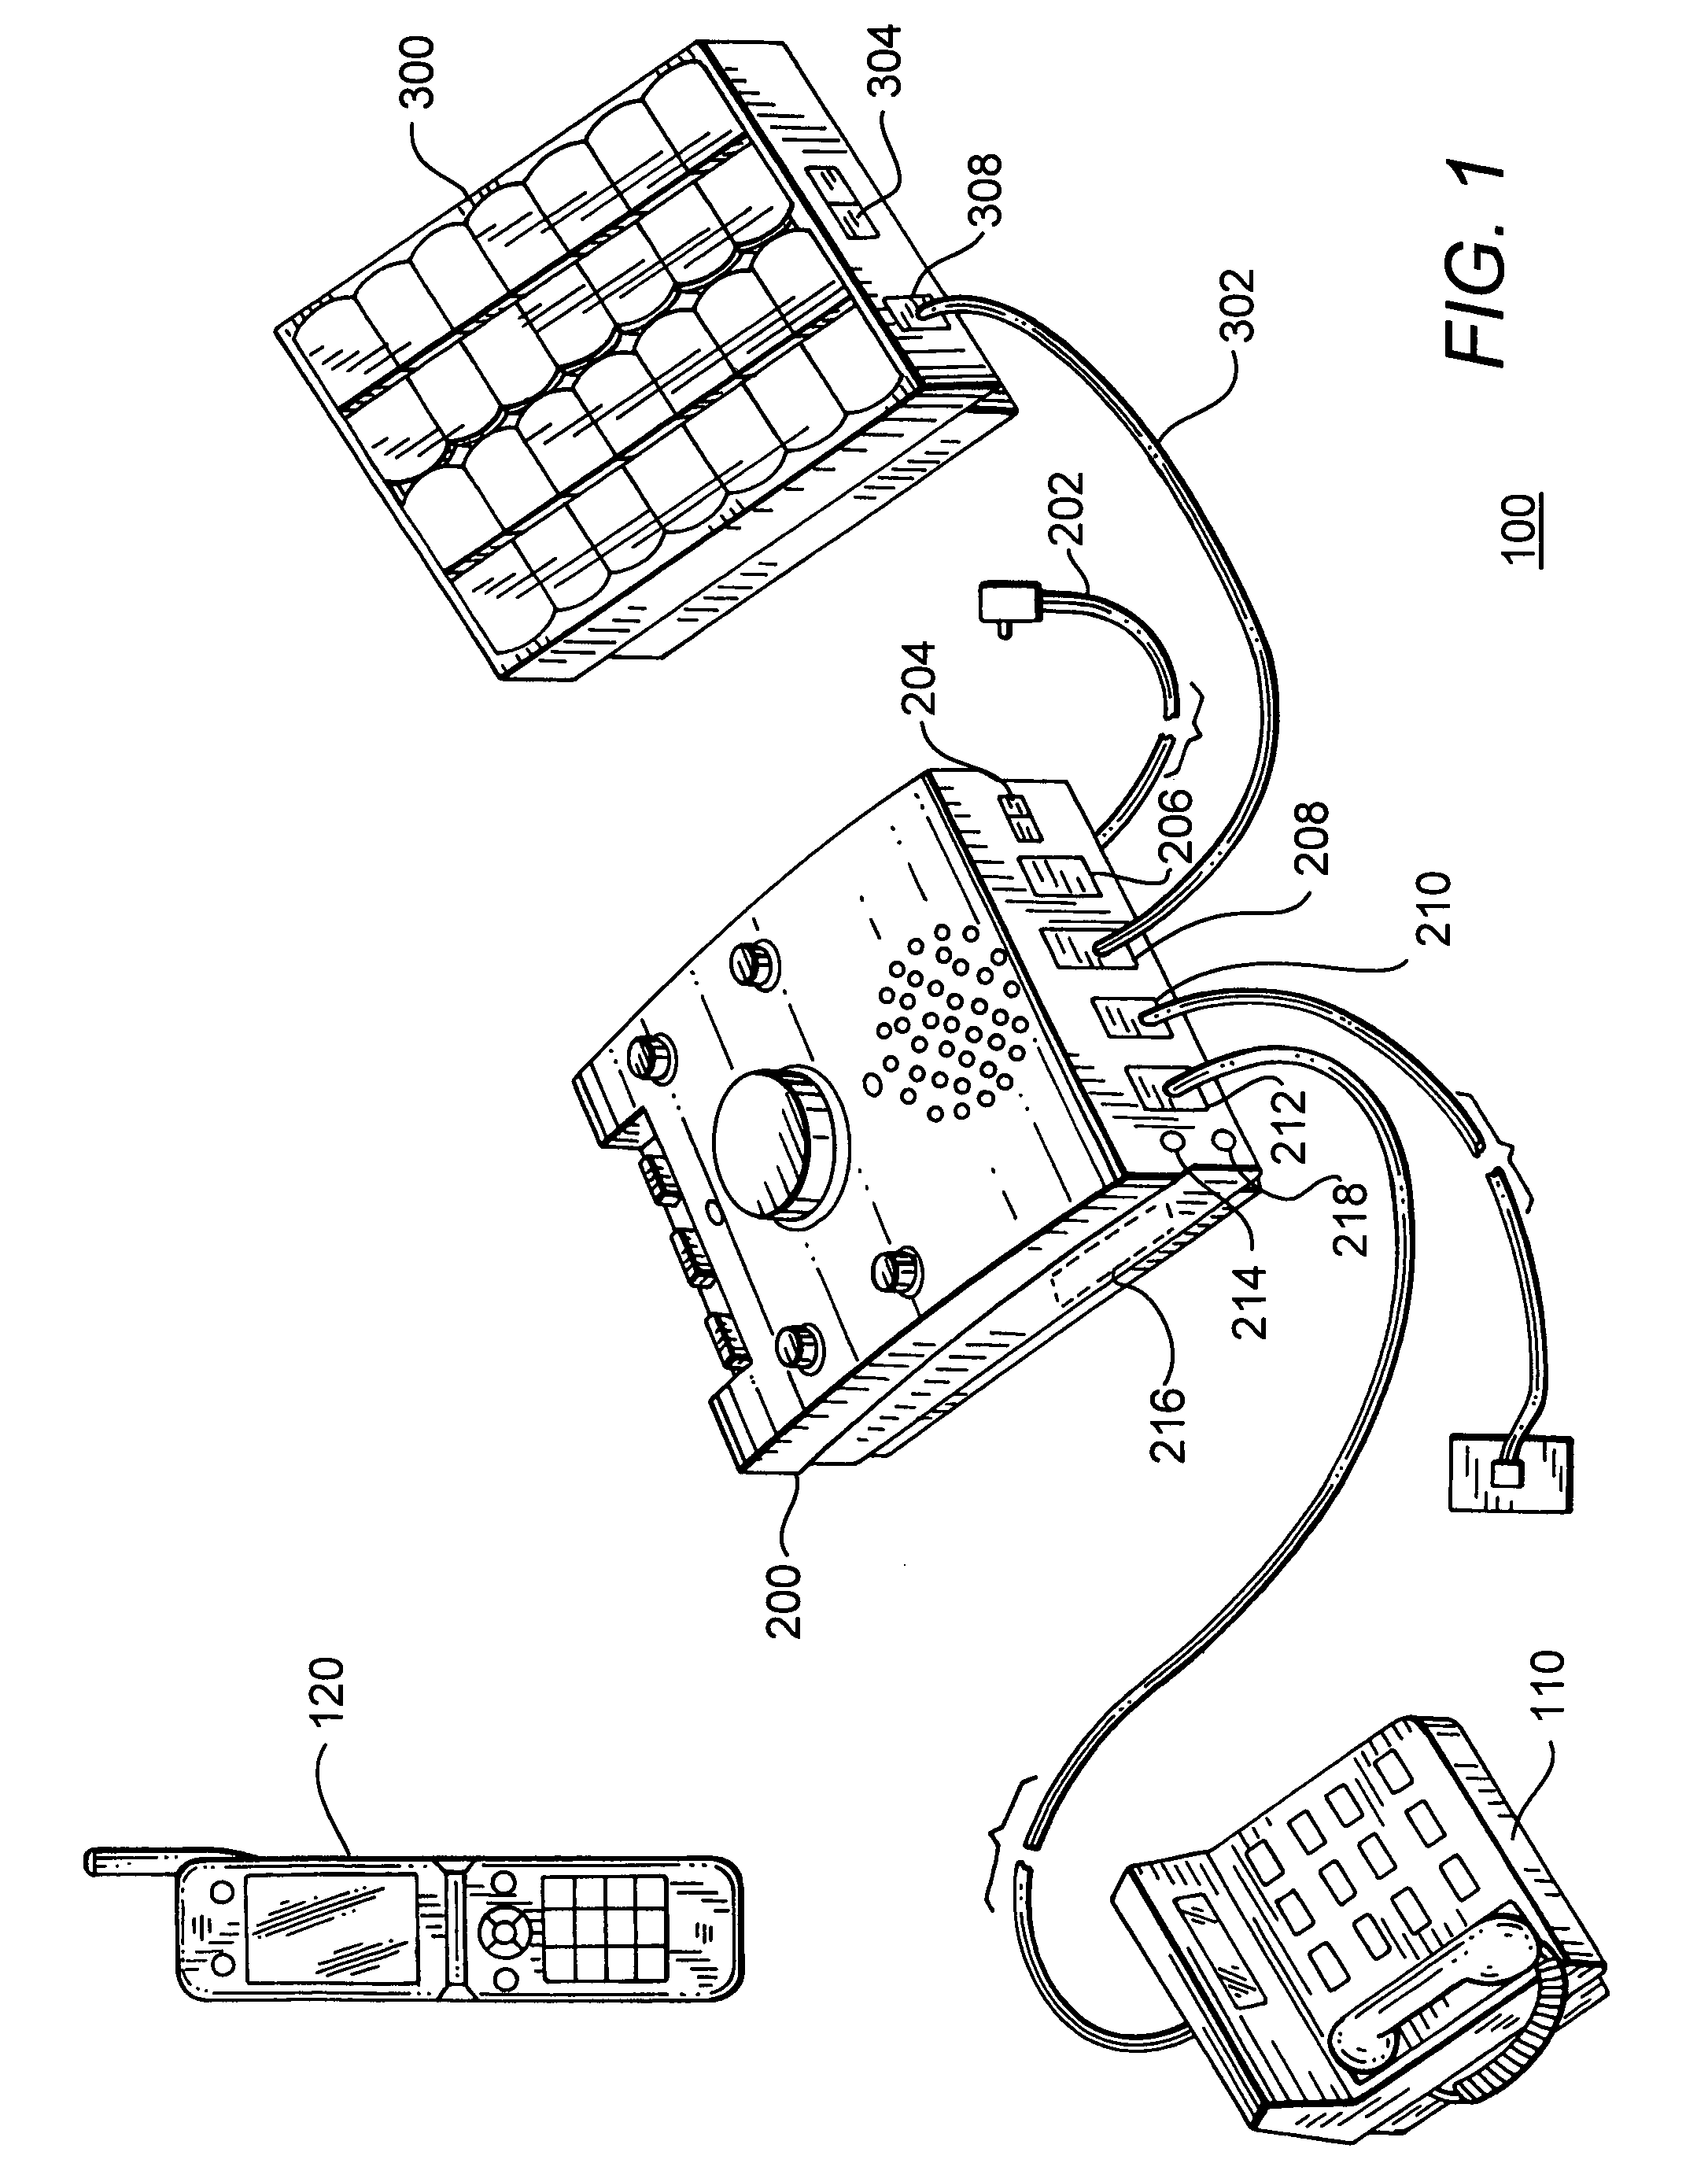 Automated programmable medication reminder and dispensing system